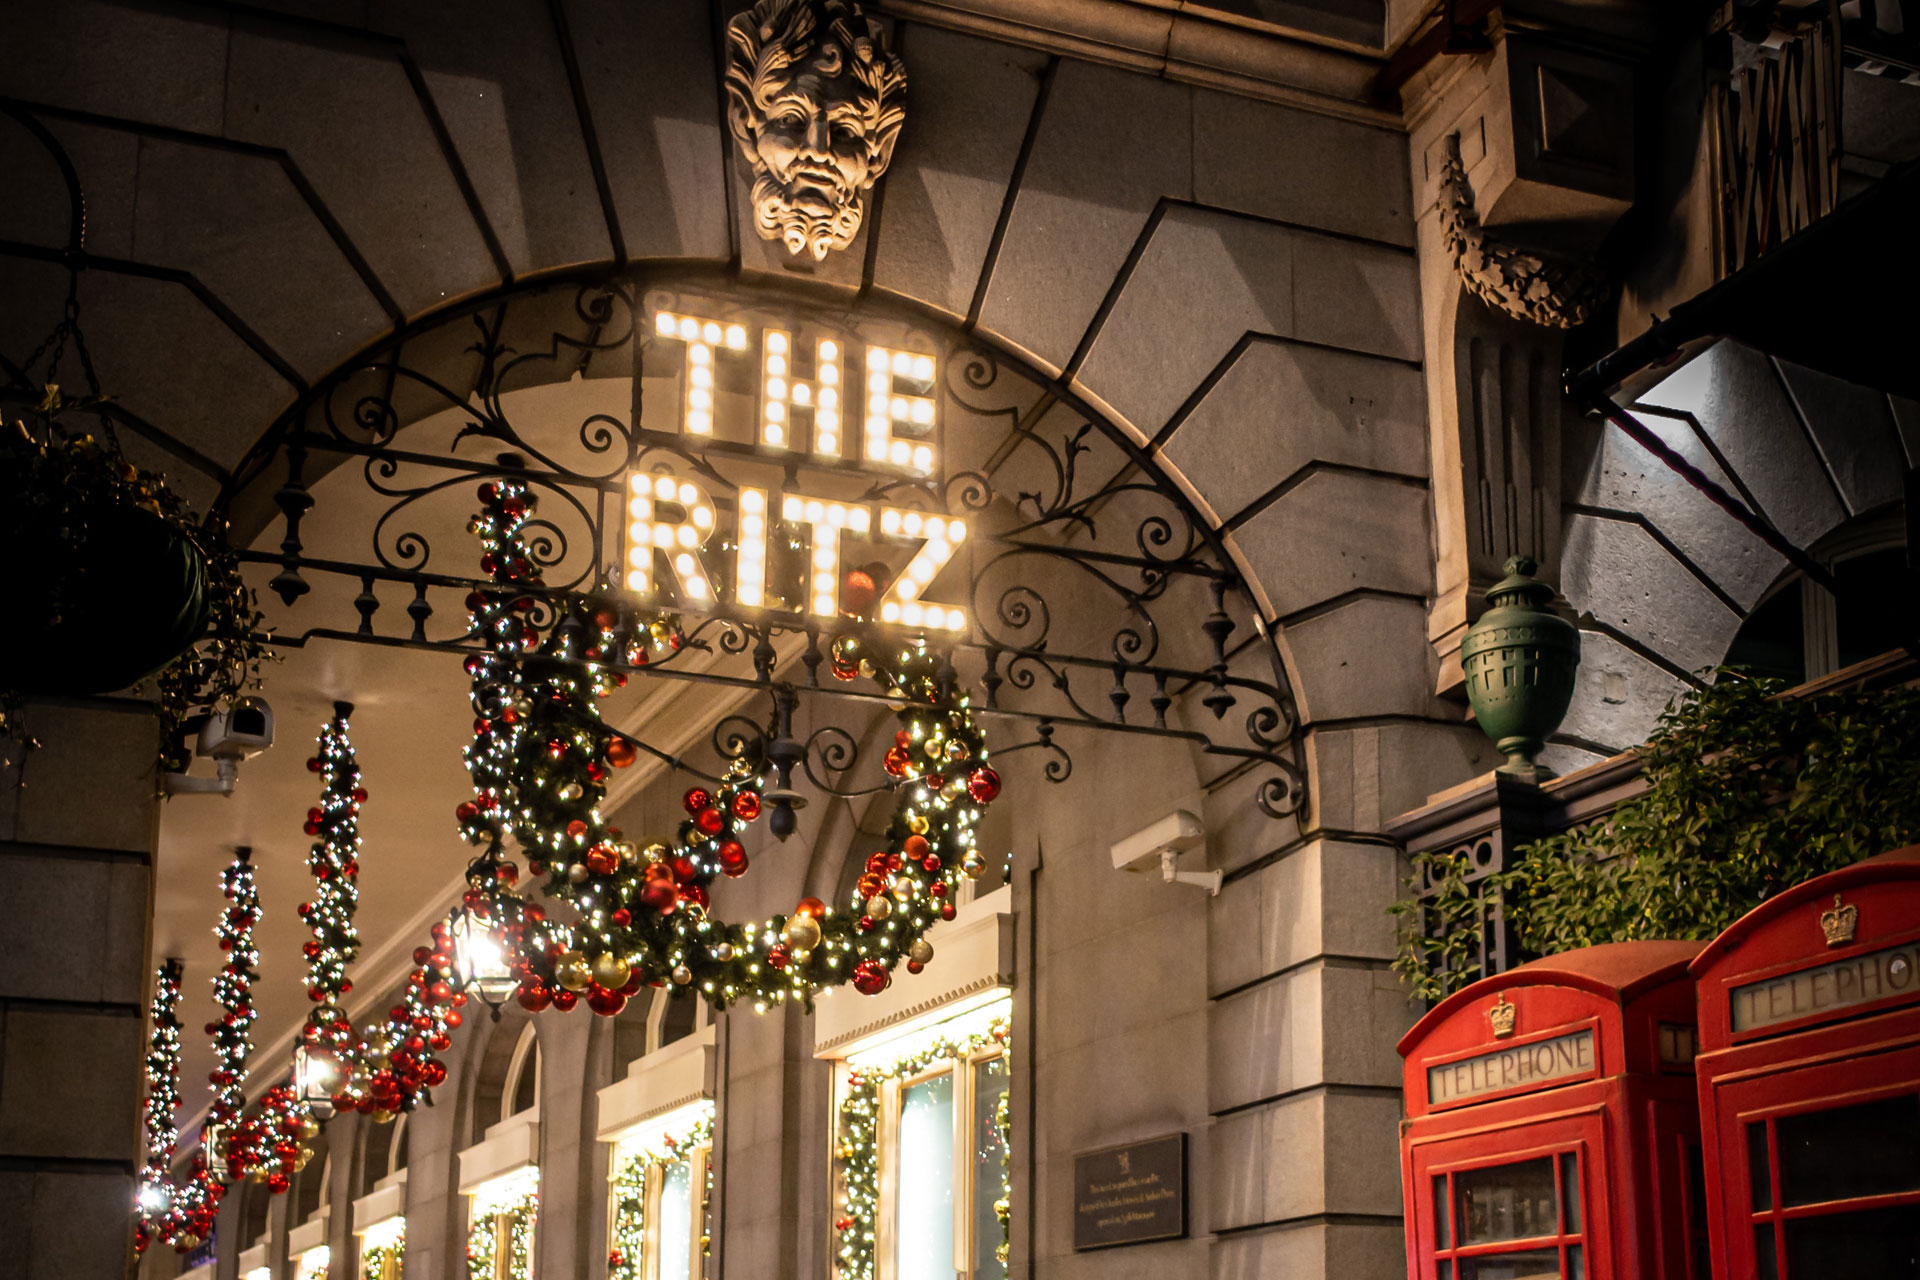 Is The Hamleys X The Ritz Christmas Grotto London’s Most Magical?